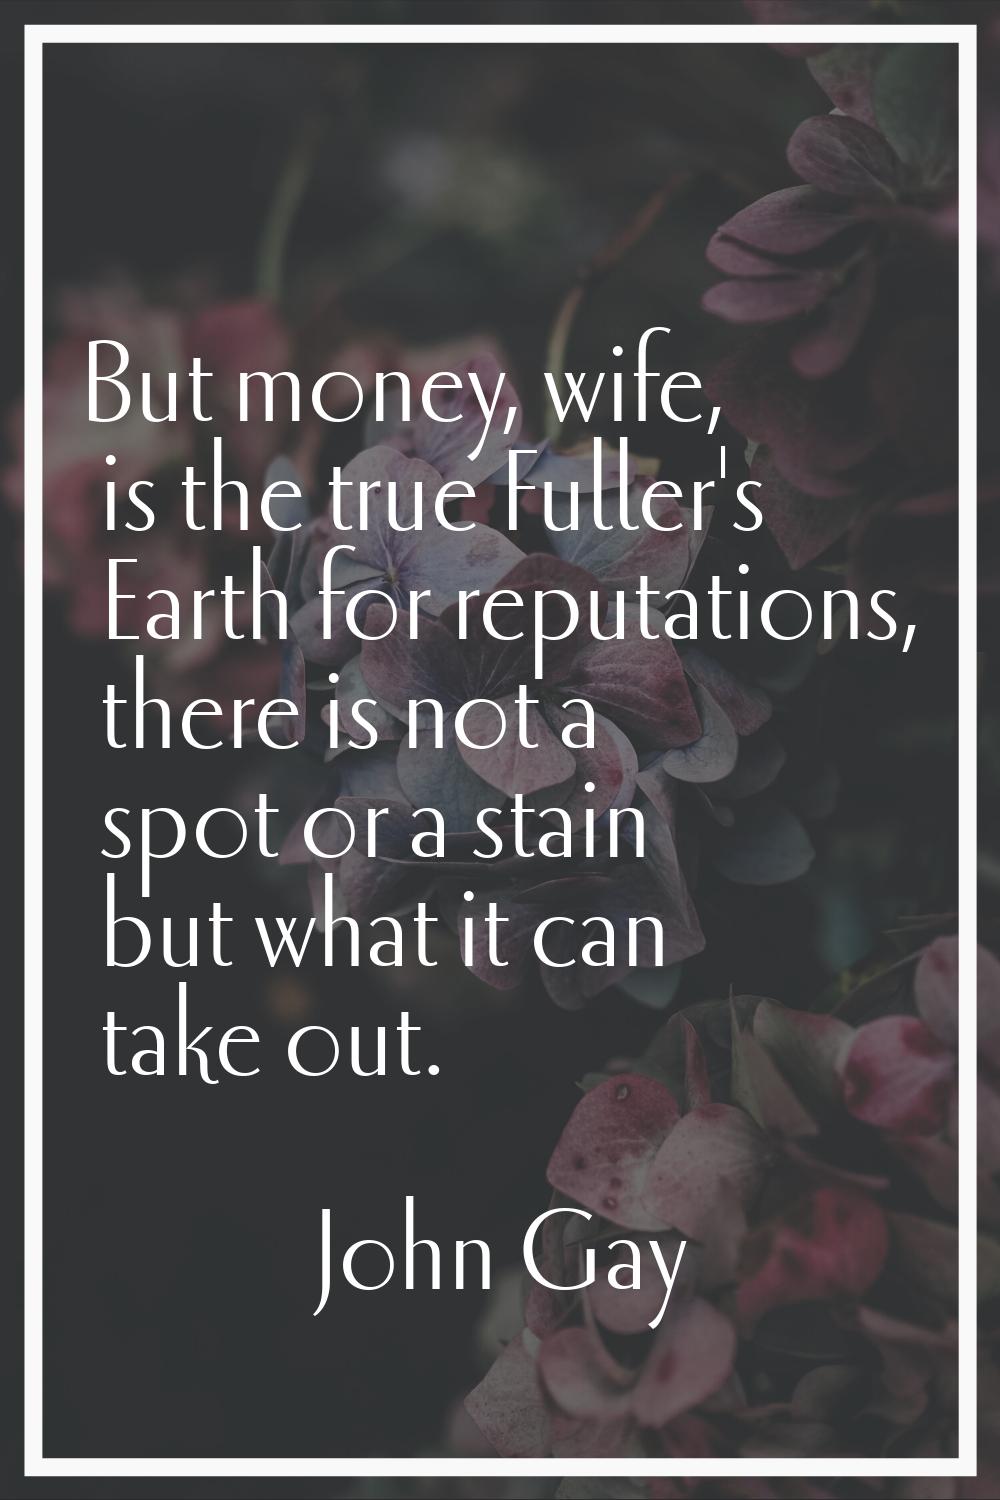 But money, wife, is the true Fuller's Earth for reputations, there is not a spot or a stain but wha